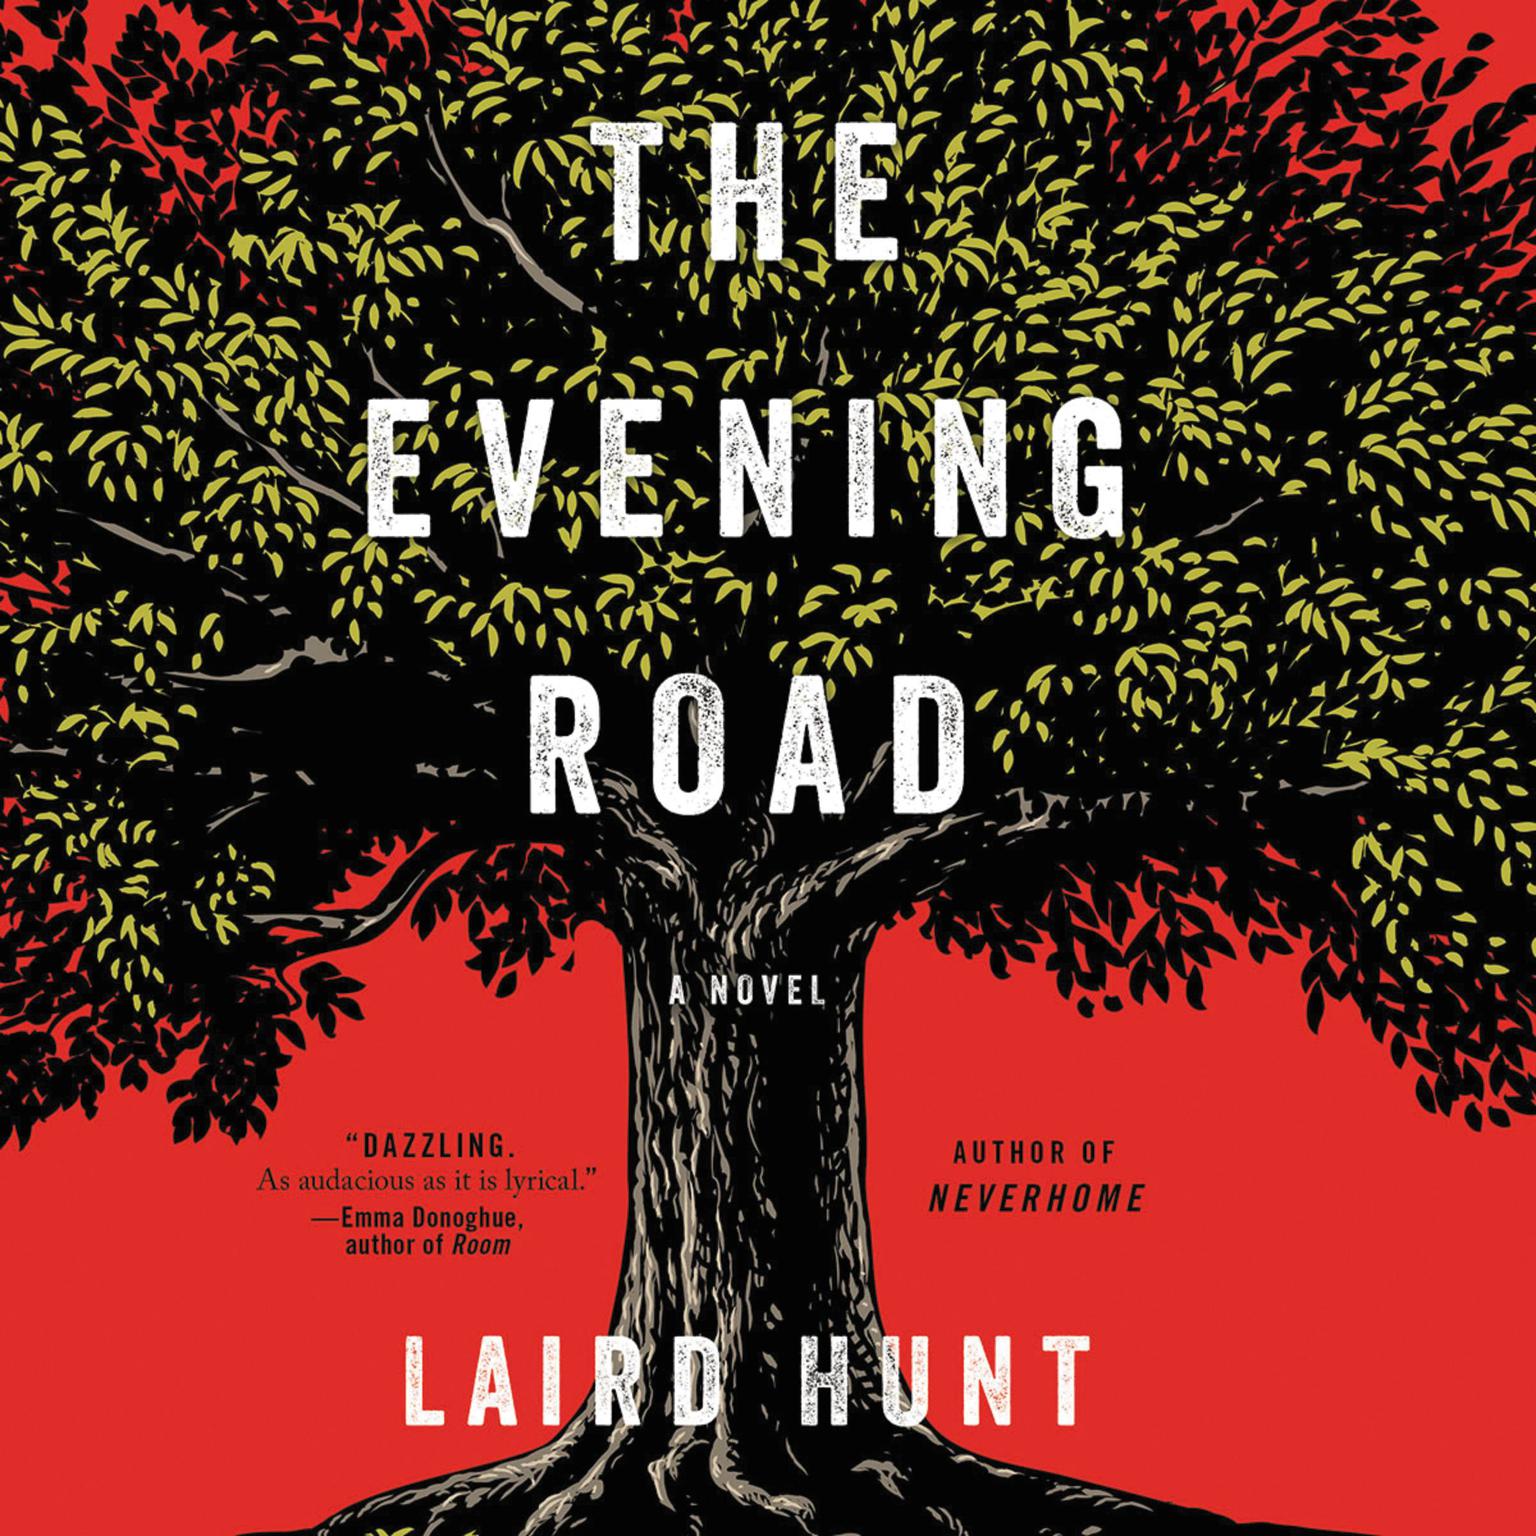 The Evening Road Audiobook, by Laird Hunt